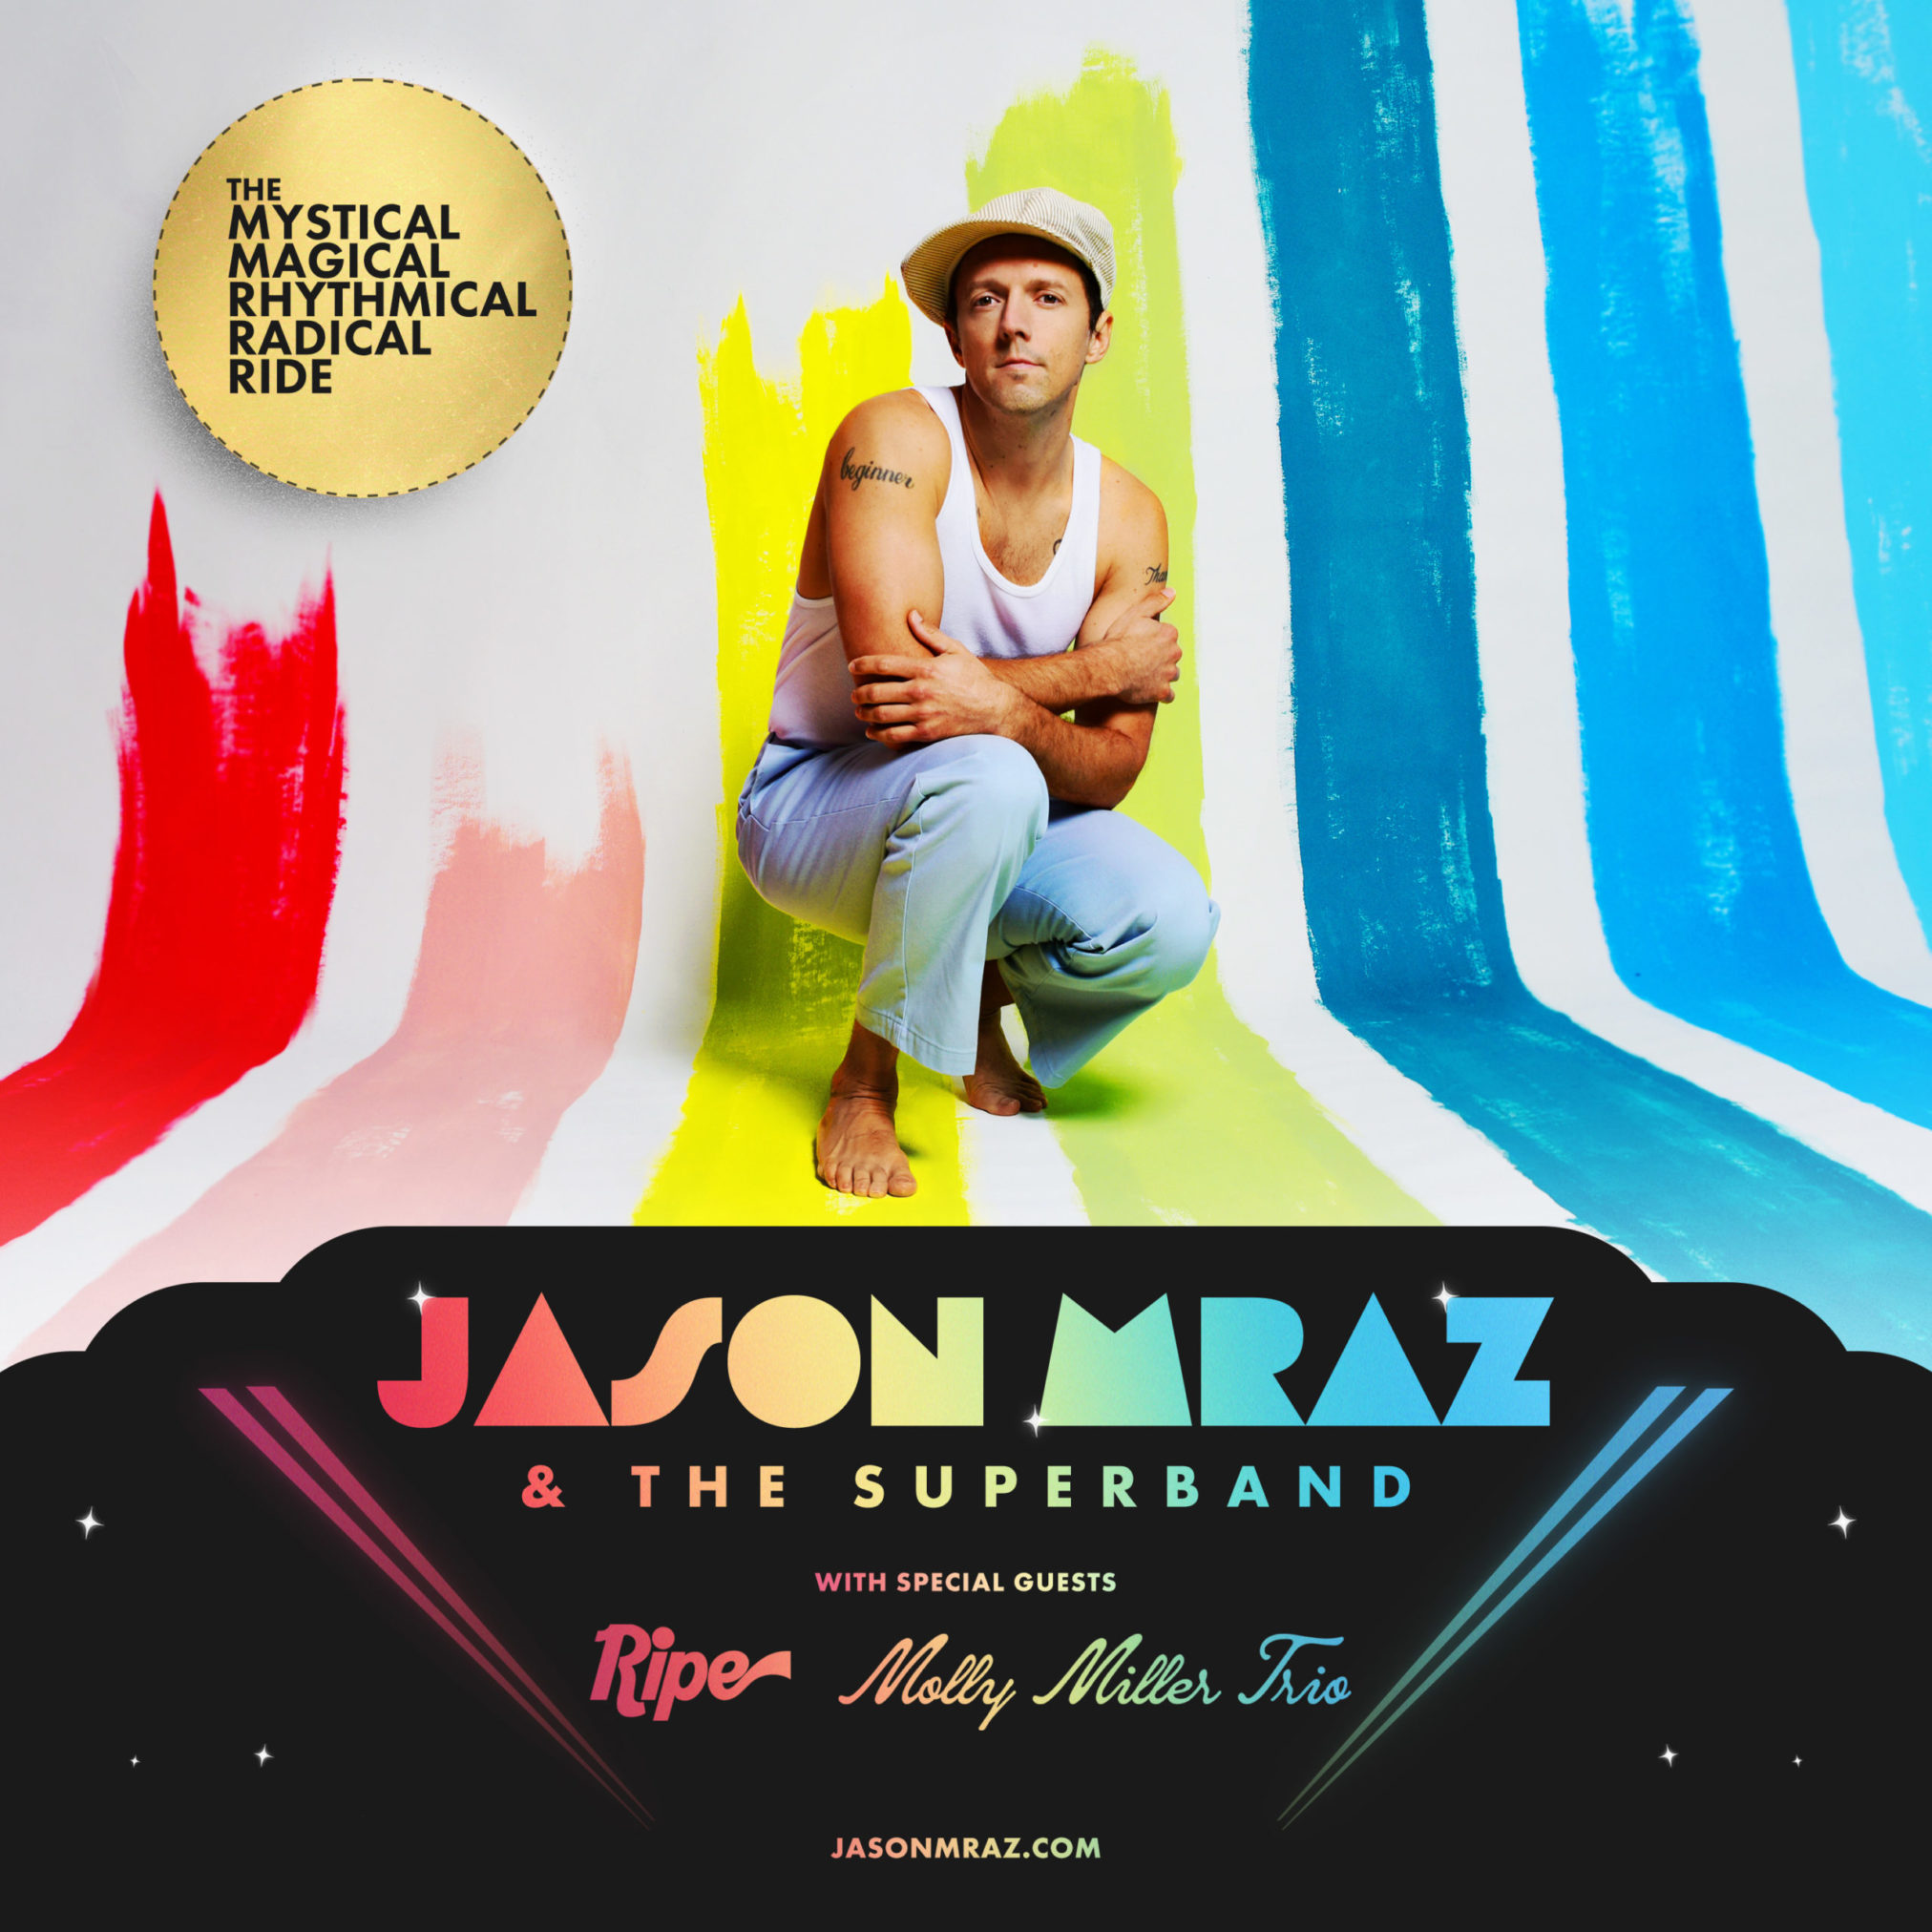 Jason Mraz & The Superband with special guests Ripe and Molly Miller Trio